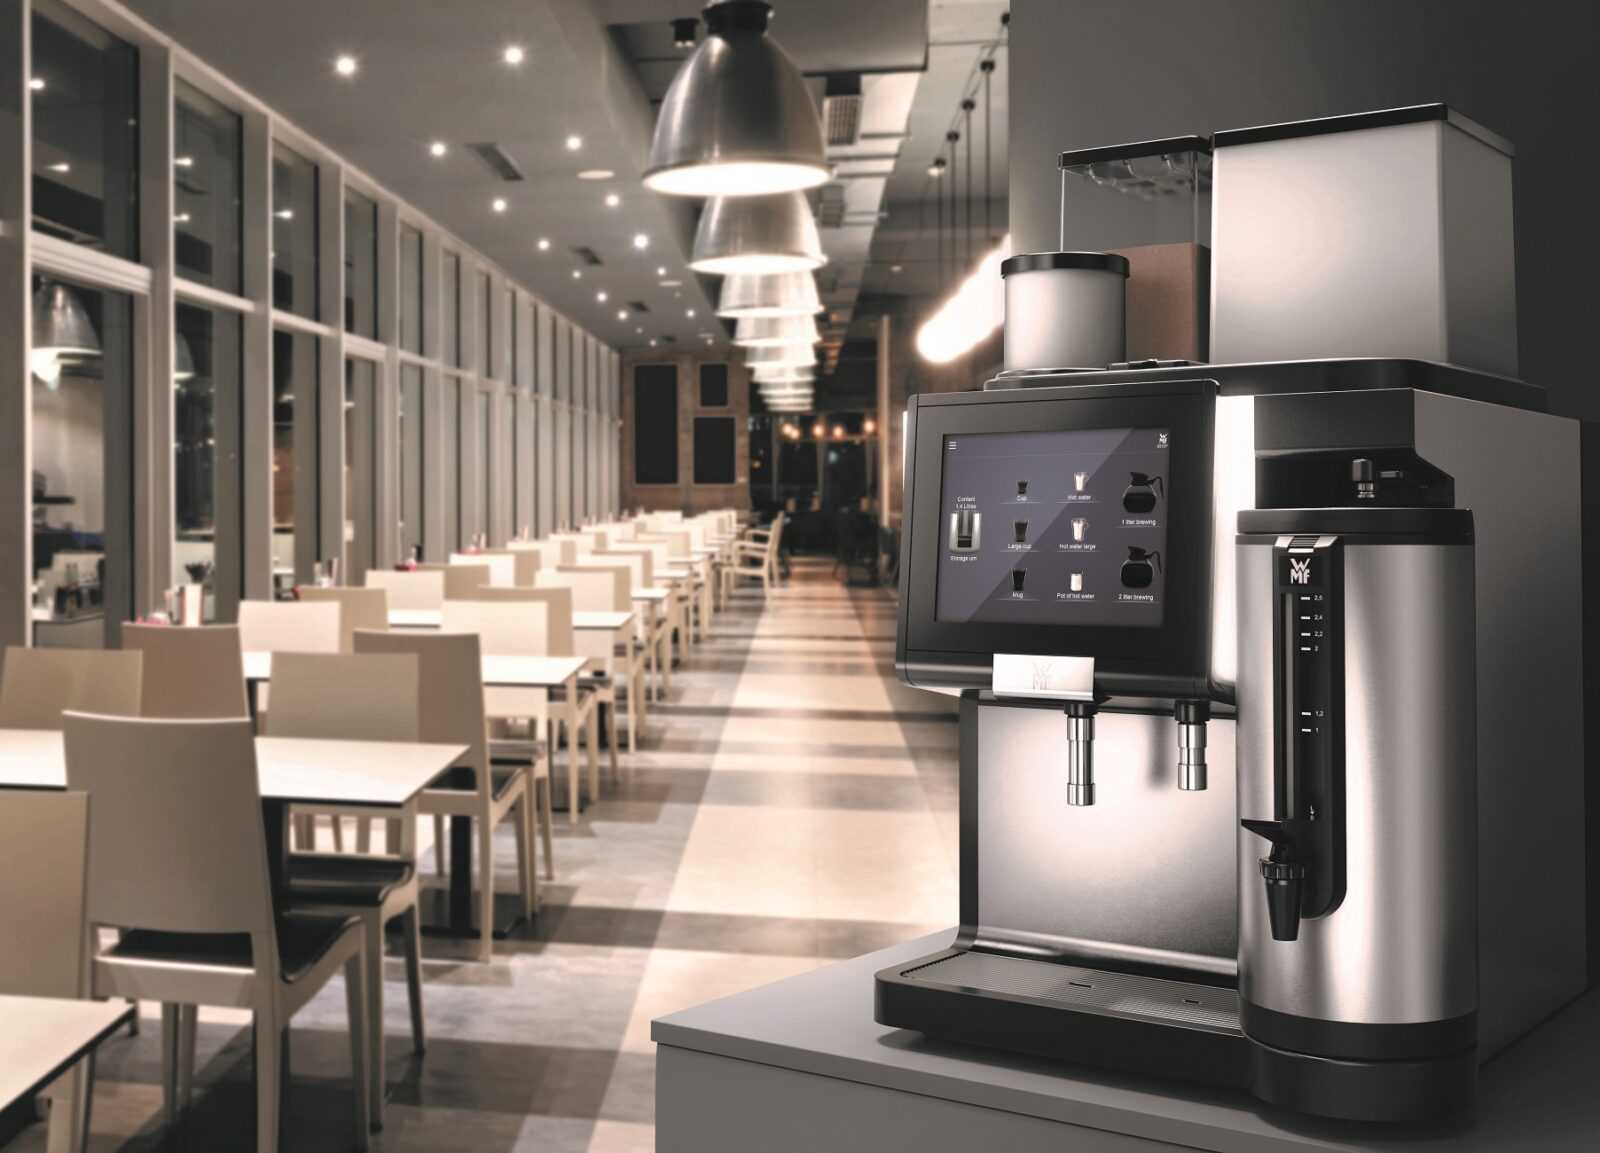 WMF introduces the new 1500 F bean-to-cup coffee machine